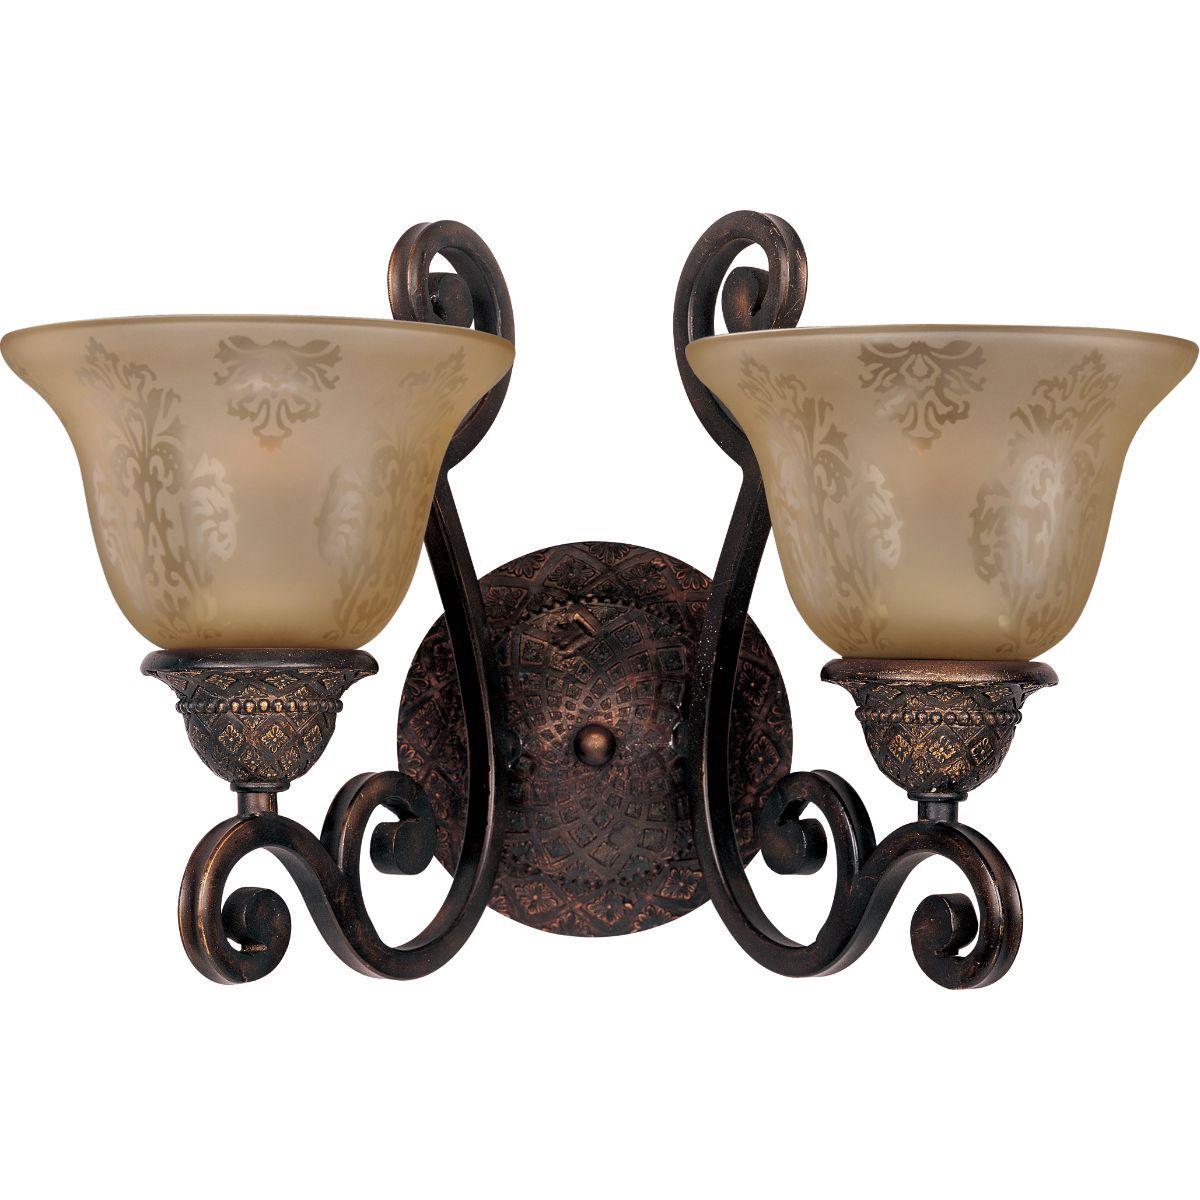 Symphony 16 in. 2 Lights Vanity Light Oil-Rubbed Bronze Finish